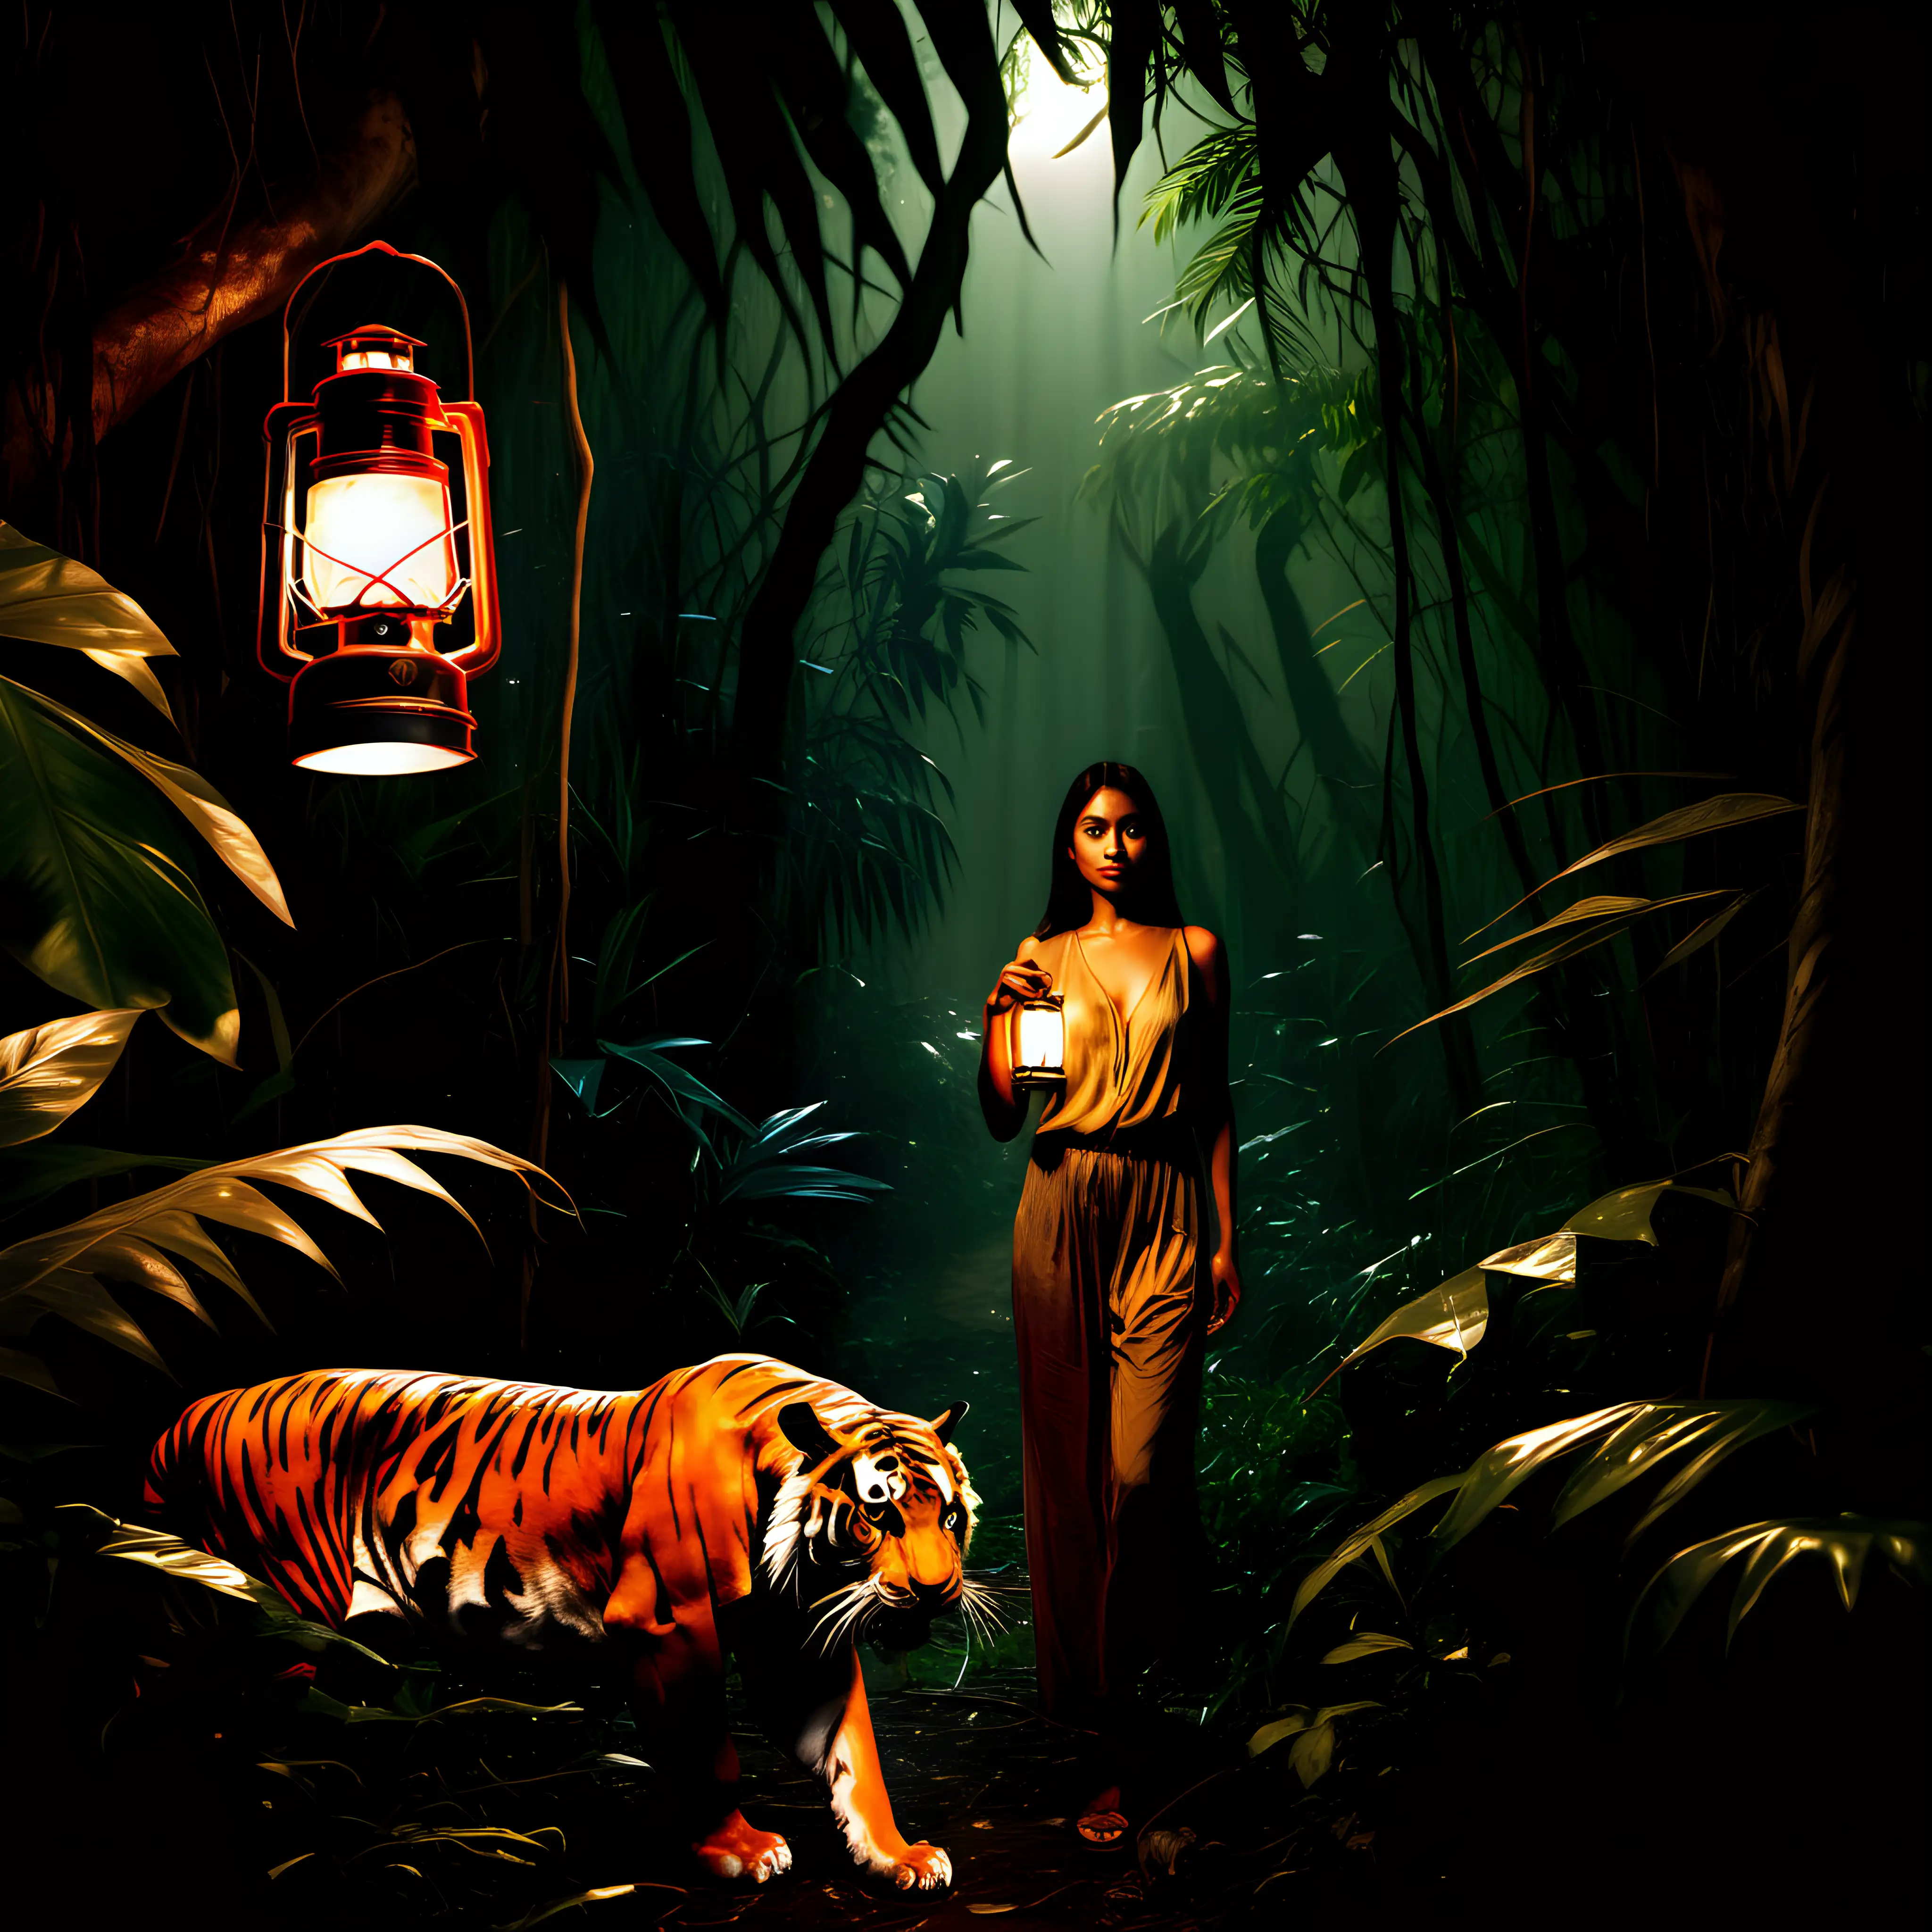 Woman Holding Lantern in Jungle with Tiger